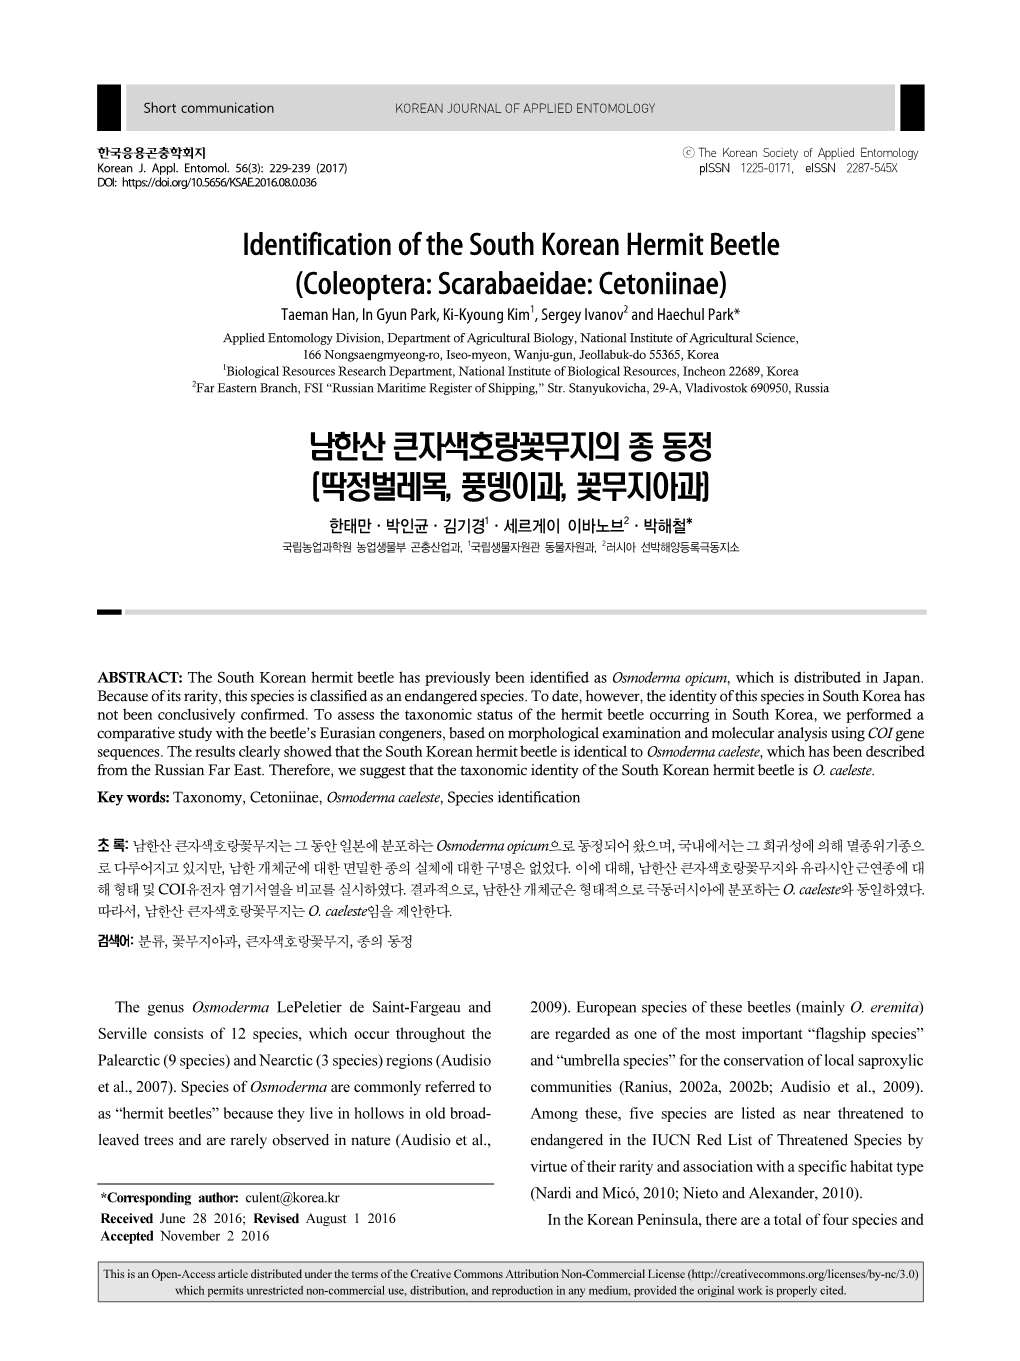 Identification of the South Korean Hermit Beetle (Coleoptera